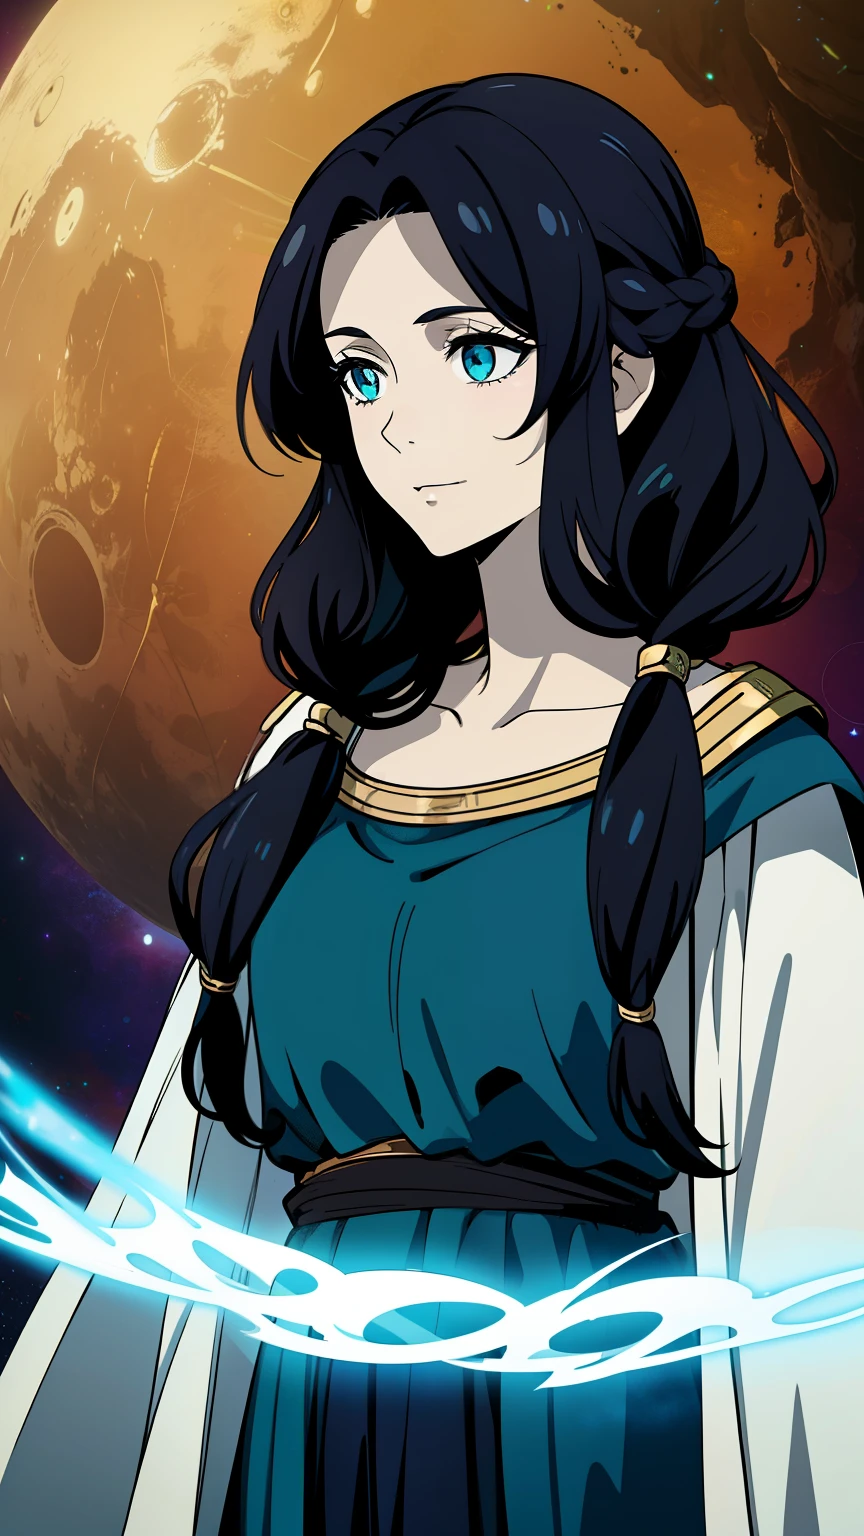 (high-quality, breathtaking),(expressive eyes, perfect face) 1female, female, solo, short height, adult, long length hair, black hair color, glowing hair, white strands in hair, unkept hair, pale light teal eyes, positive expression, soft smile, cloak, shirt, fantasy mage clothing, adventurers attire, Pluto planet, Pluto Roman God of the Underworld, space background, portrait, upper body, magic, elegant, pigtails, stylized hairstyle, gorgeous flowy curly hair, mum vibe, age 50's, Greek Clothing
